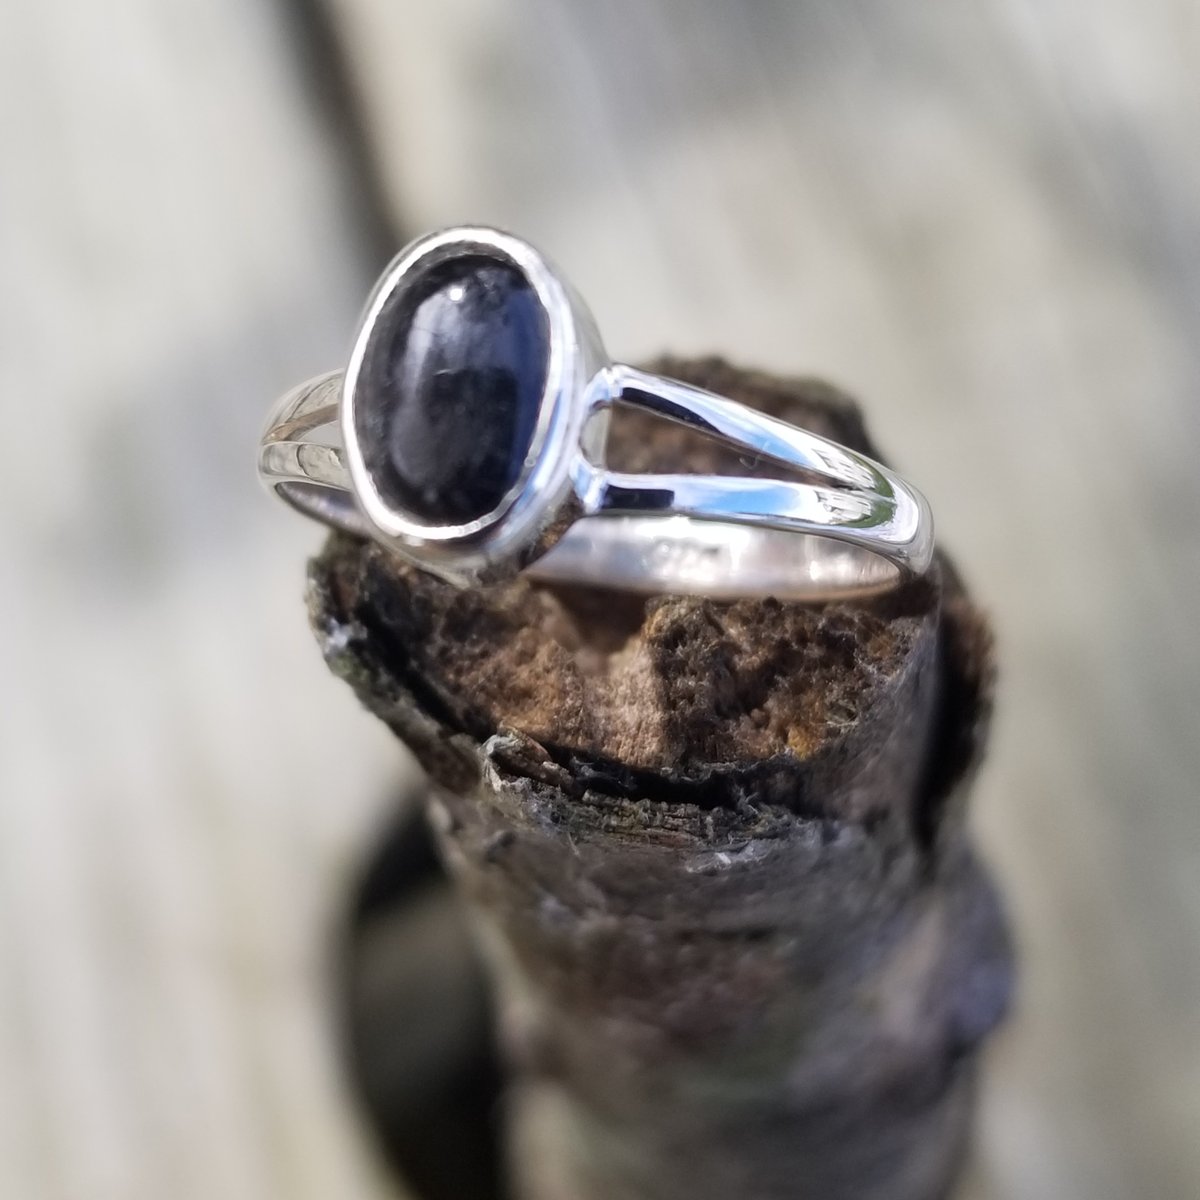 Image of Petite Noir Ring - Black Onyx in Sterling (Every One Collection)